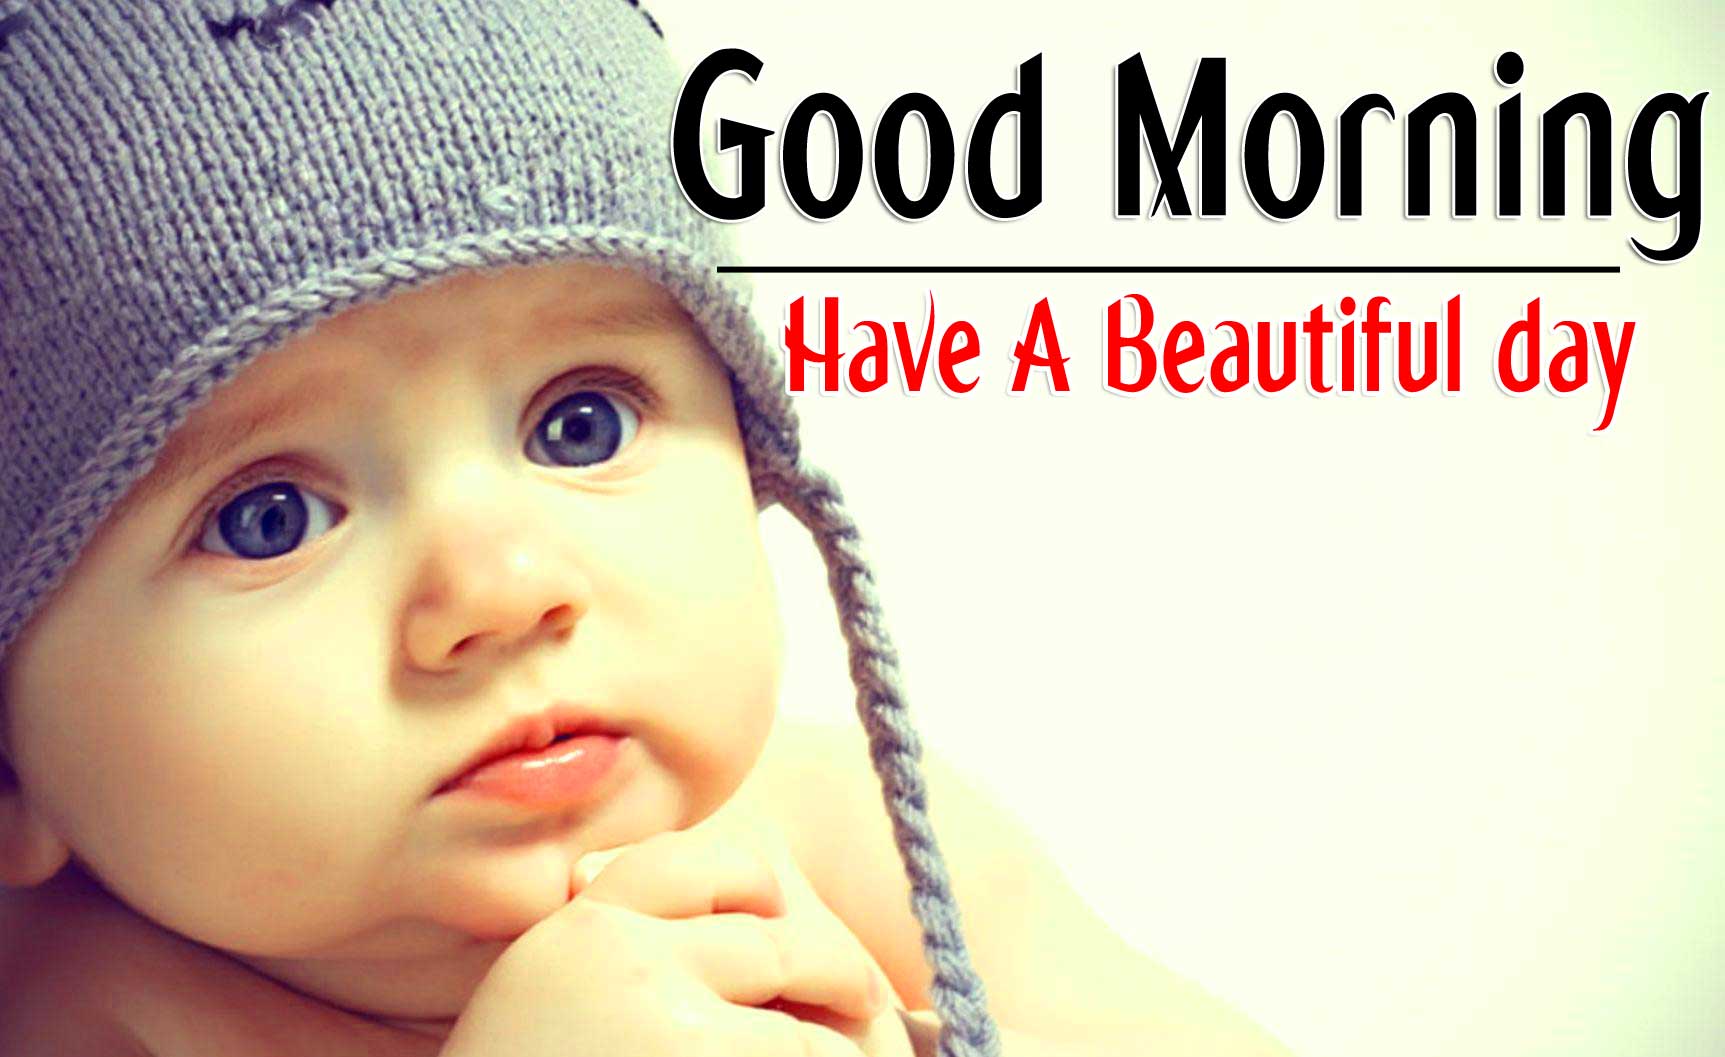 Good Morning Baby Images (61) – Good Morning Images | Good Morning Photo HD  Downlaod | Good Morning Pics Wallpaper HD